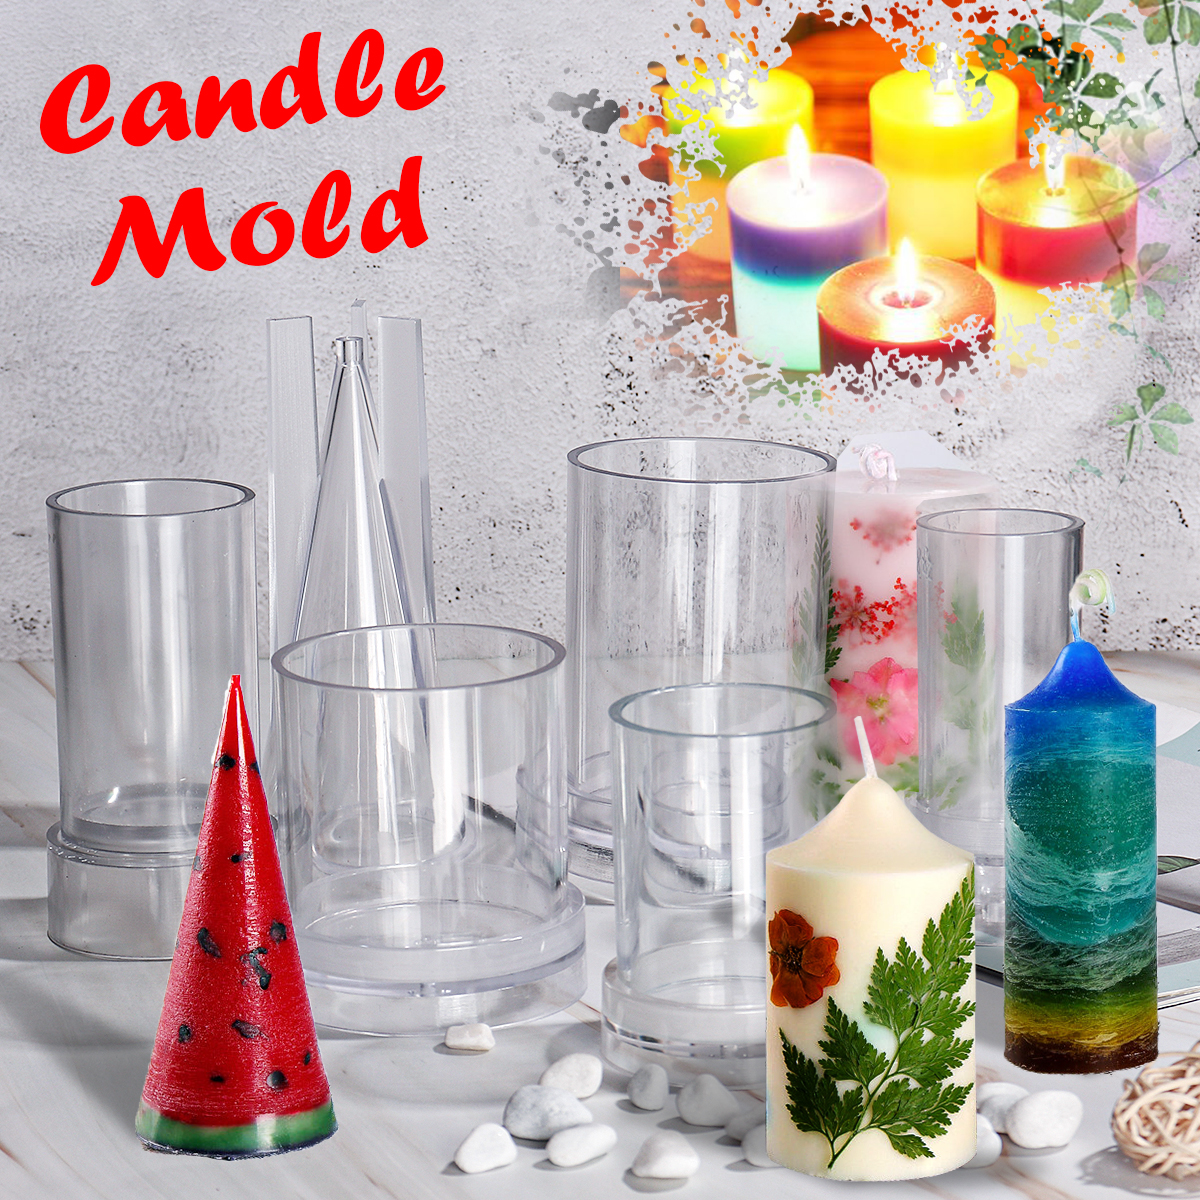 US DIY Candle Molds Candle Making Mould Handmade Soap Molds Clay Craft Tools 